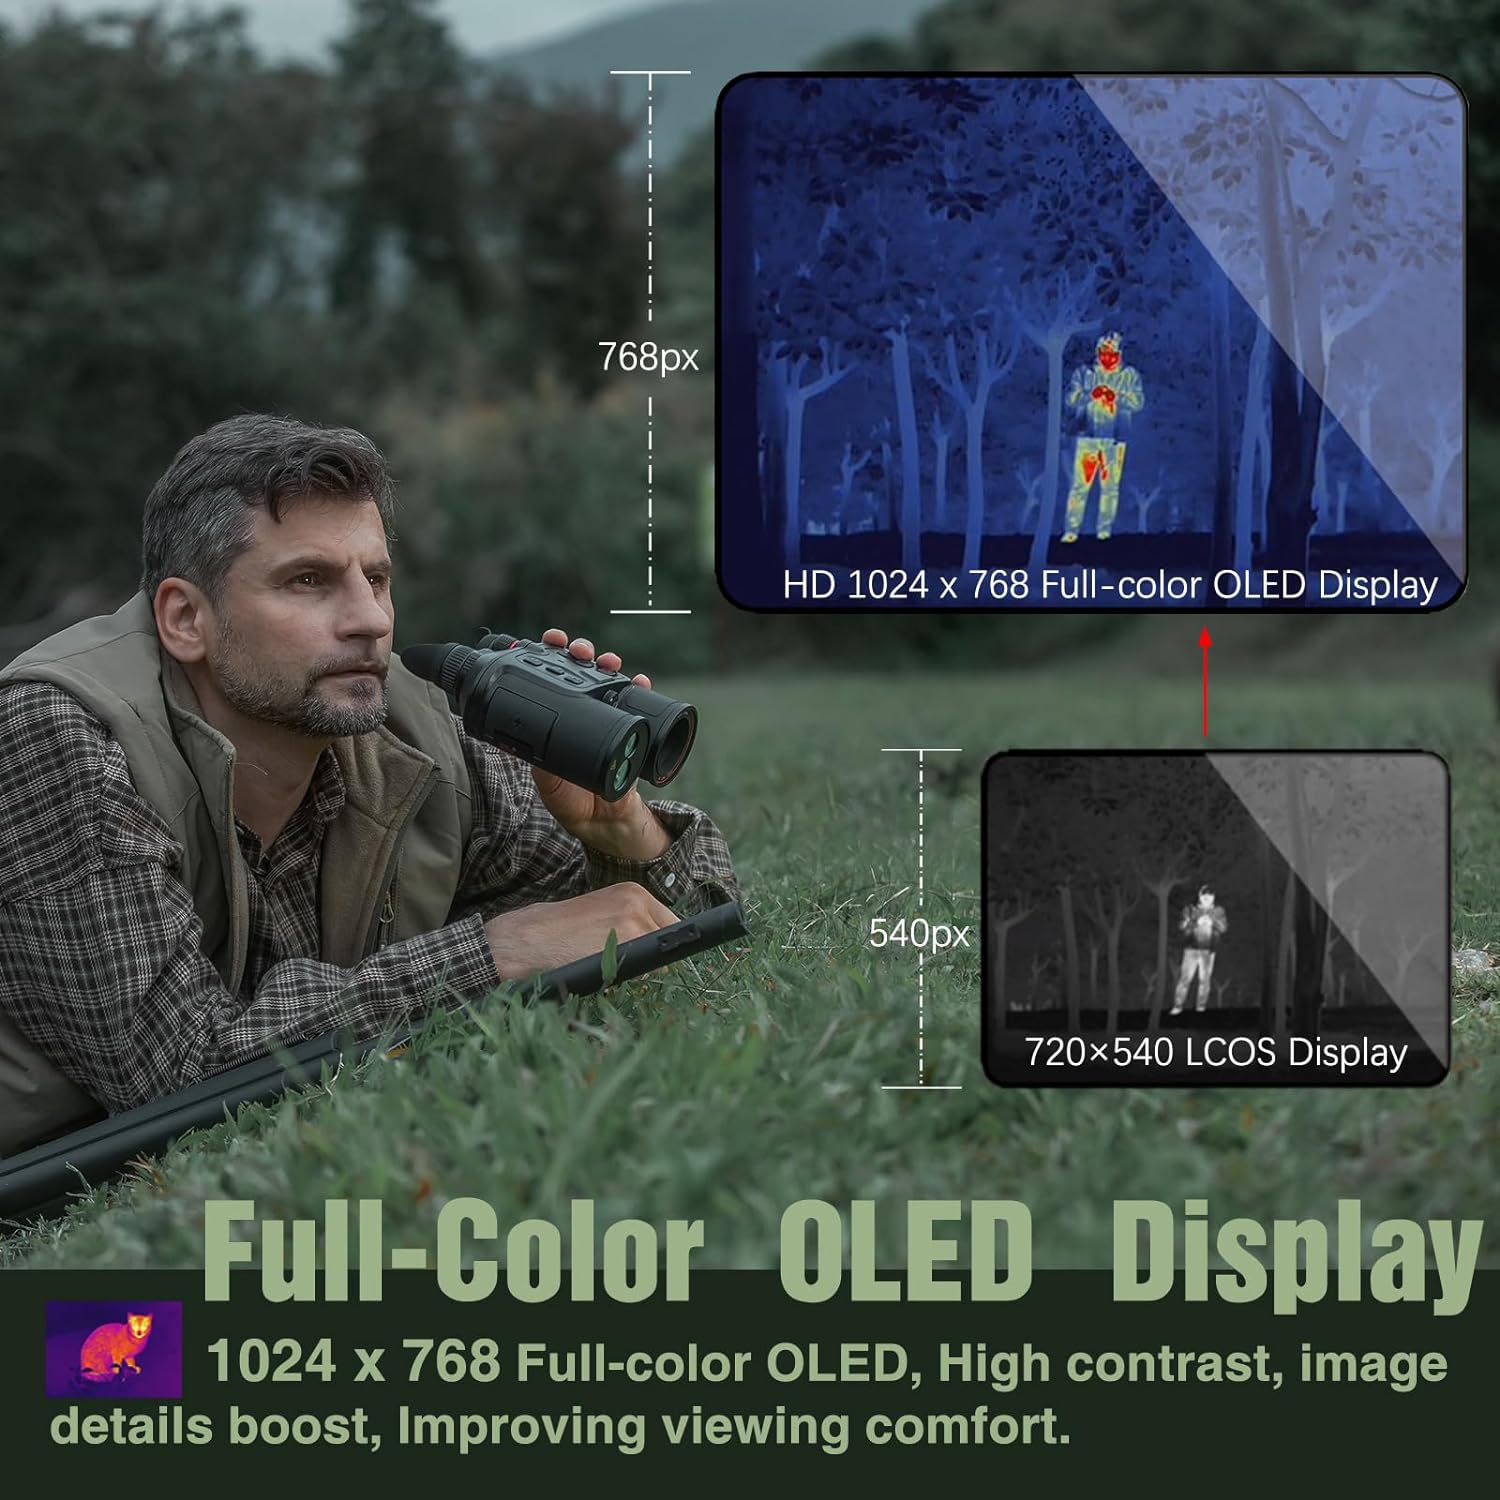 GuideSensmart TN630 Thermal LRF Binoculars for Hunting， Infrared Heat Night Vision with 35mm Focal Length, 640×480 pix @  30 mK NETD Sensor, LRF with 600m Accuracy, OLED High-Definition Display